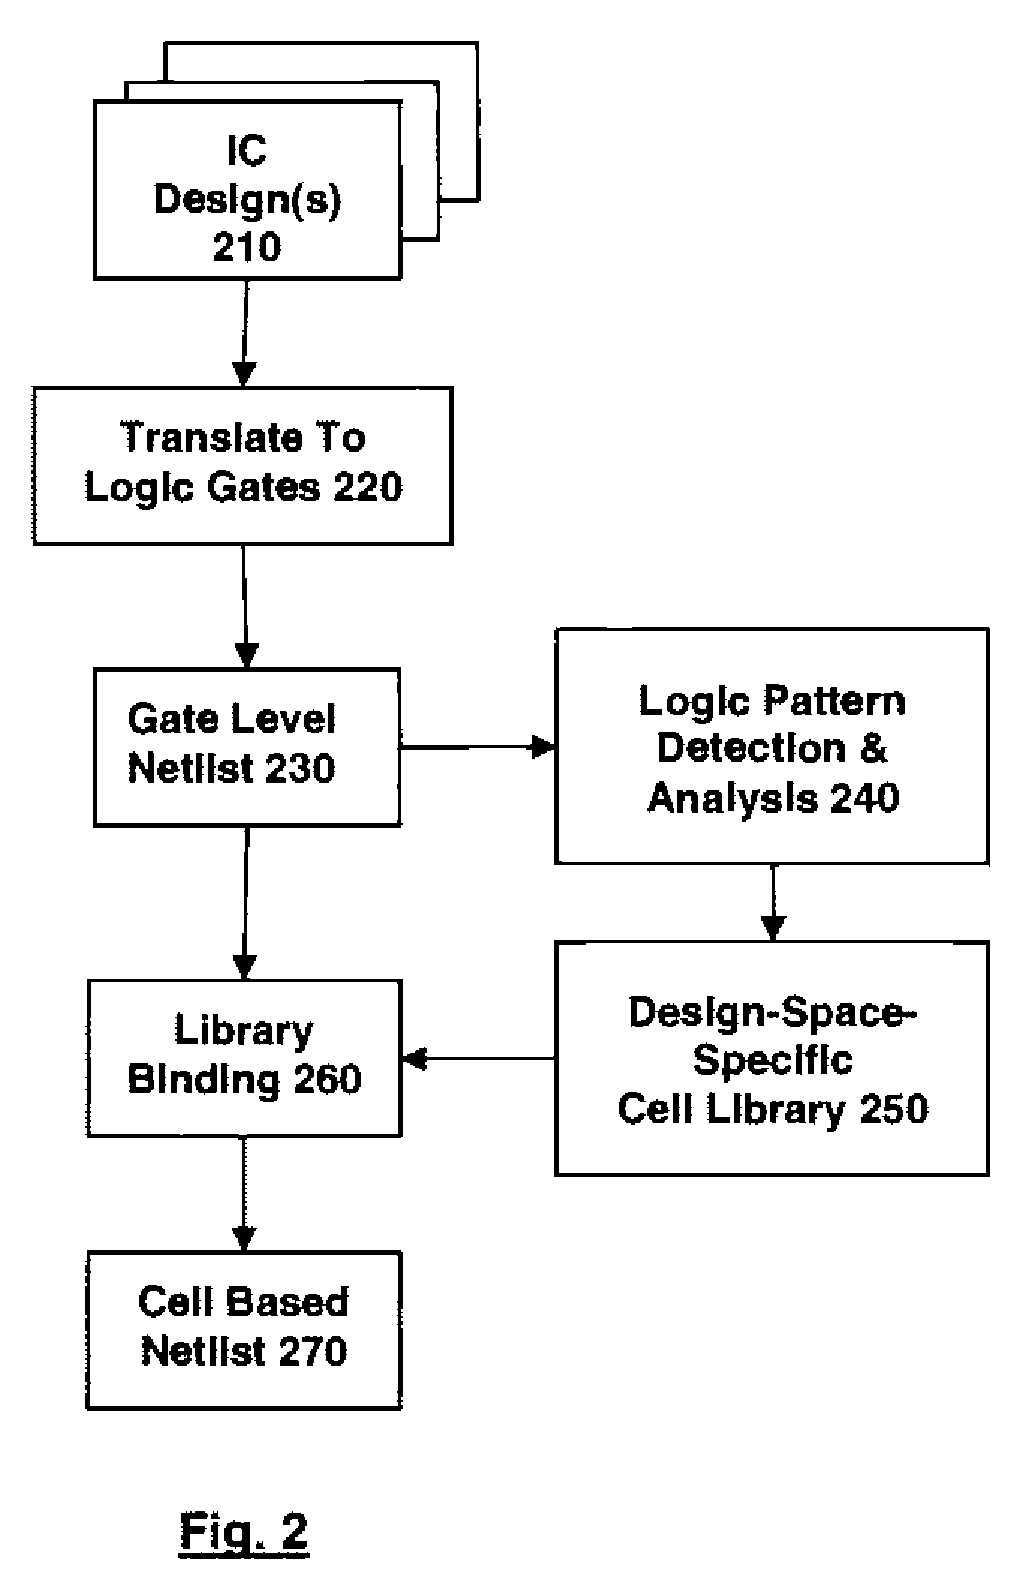 Method For The Definition Of A Library Of Application-Domain-Specific Logic Cells